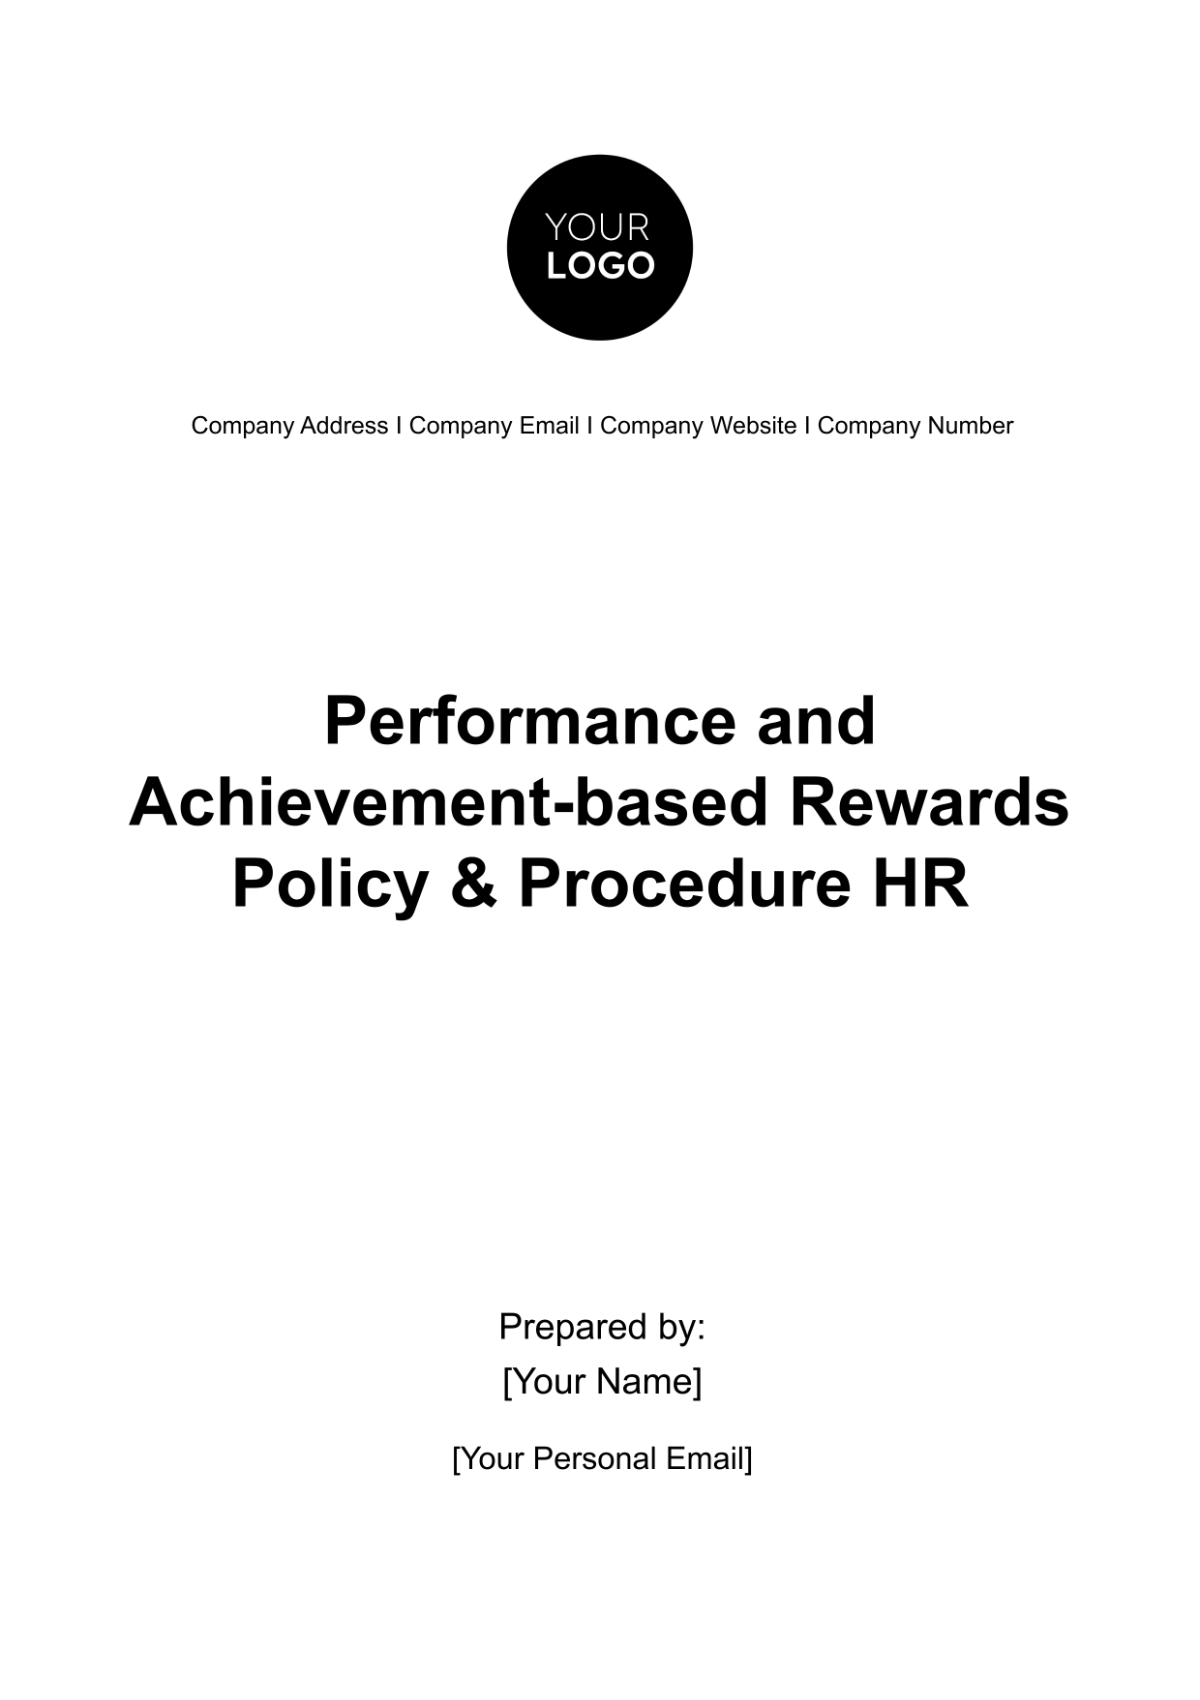 Free Performance and Achievement-based Rewards Policy & Procedure HR Template